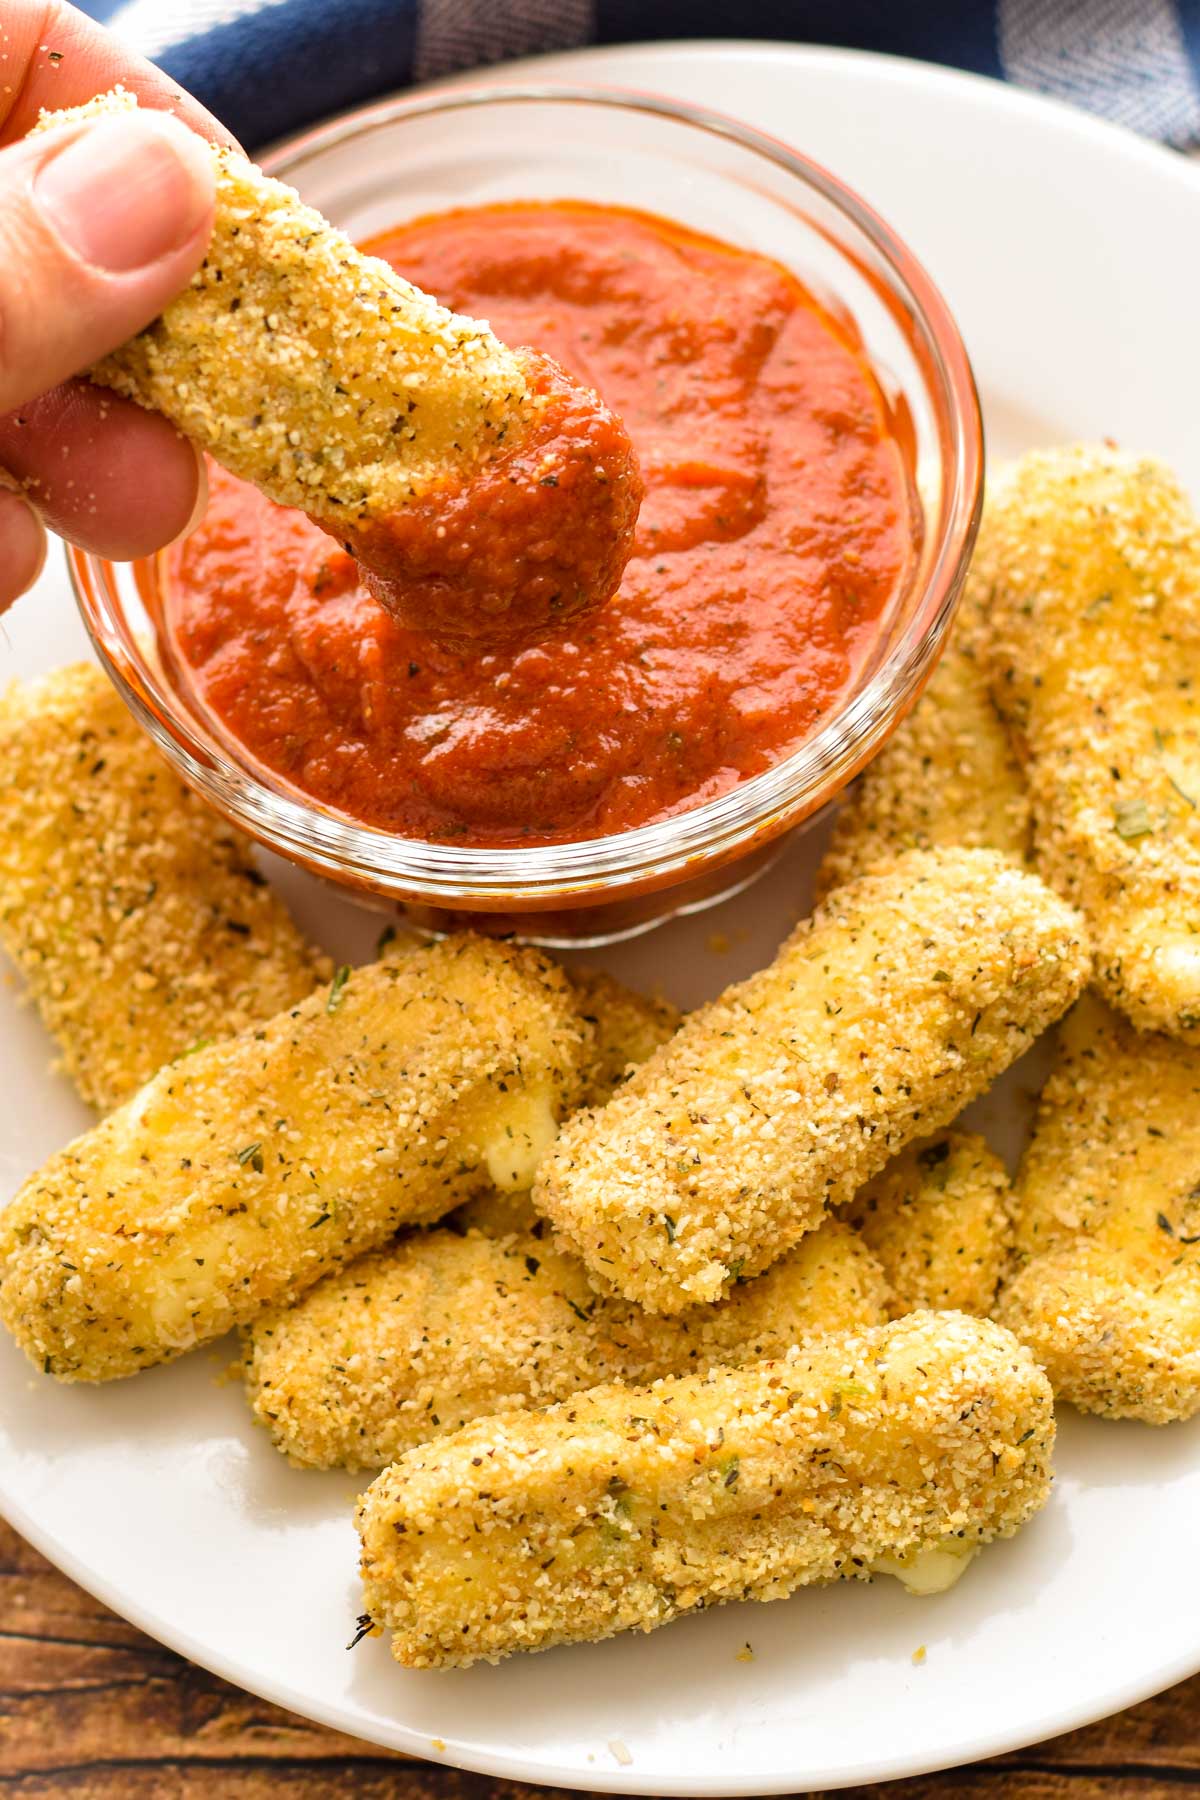 dipping a low fodmap mozzarella stick into a bowl of tomato sauce on a white plate